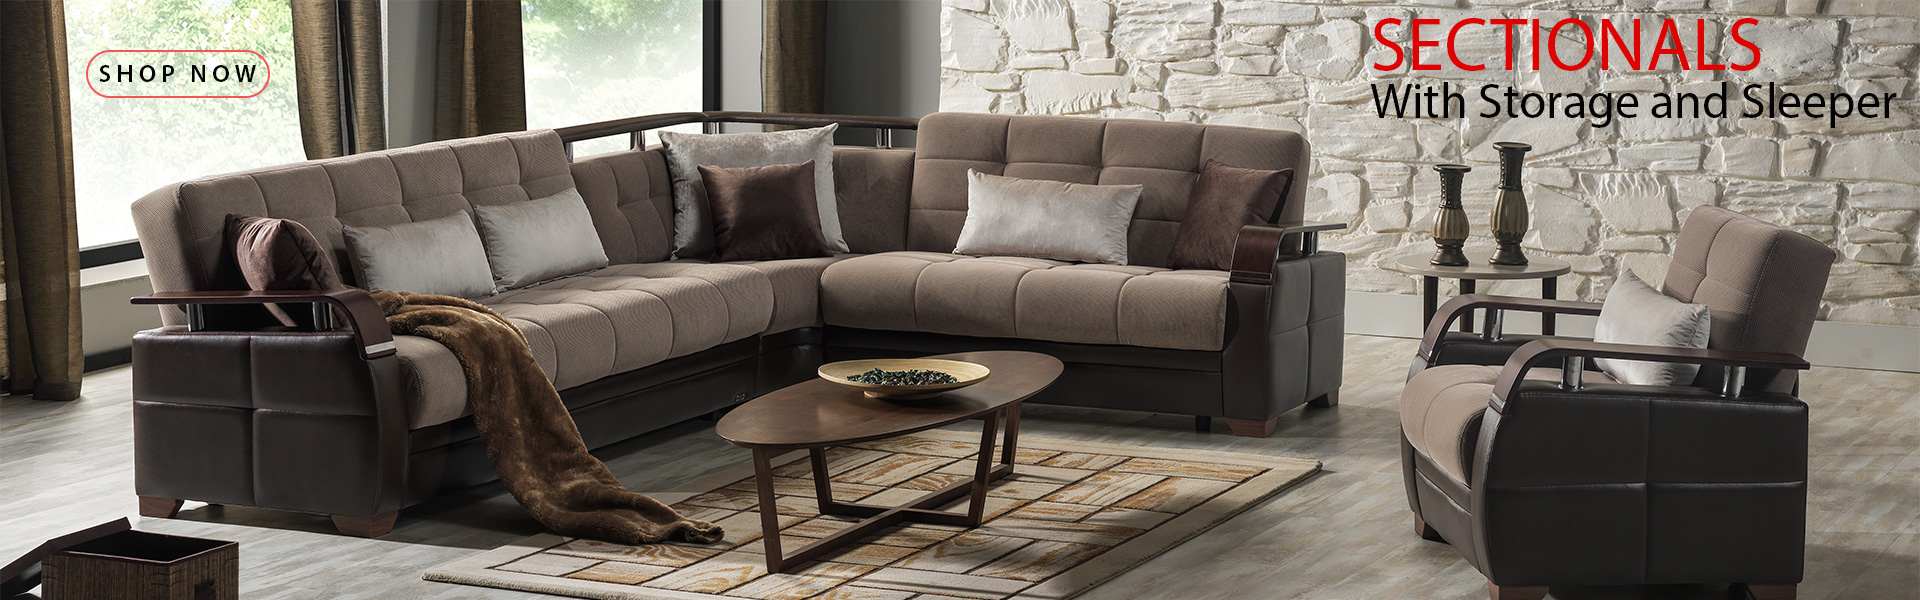 Sectional sofas with sleepers